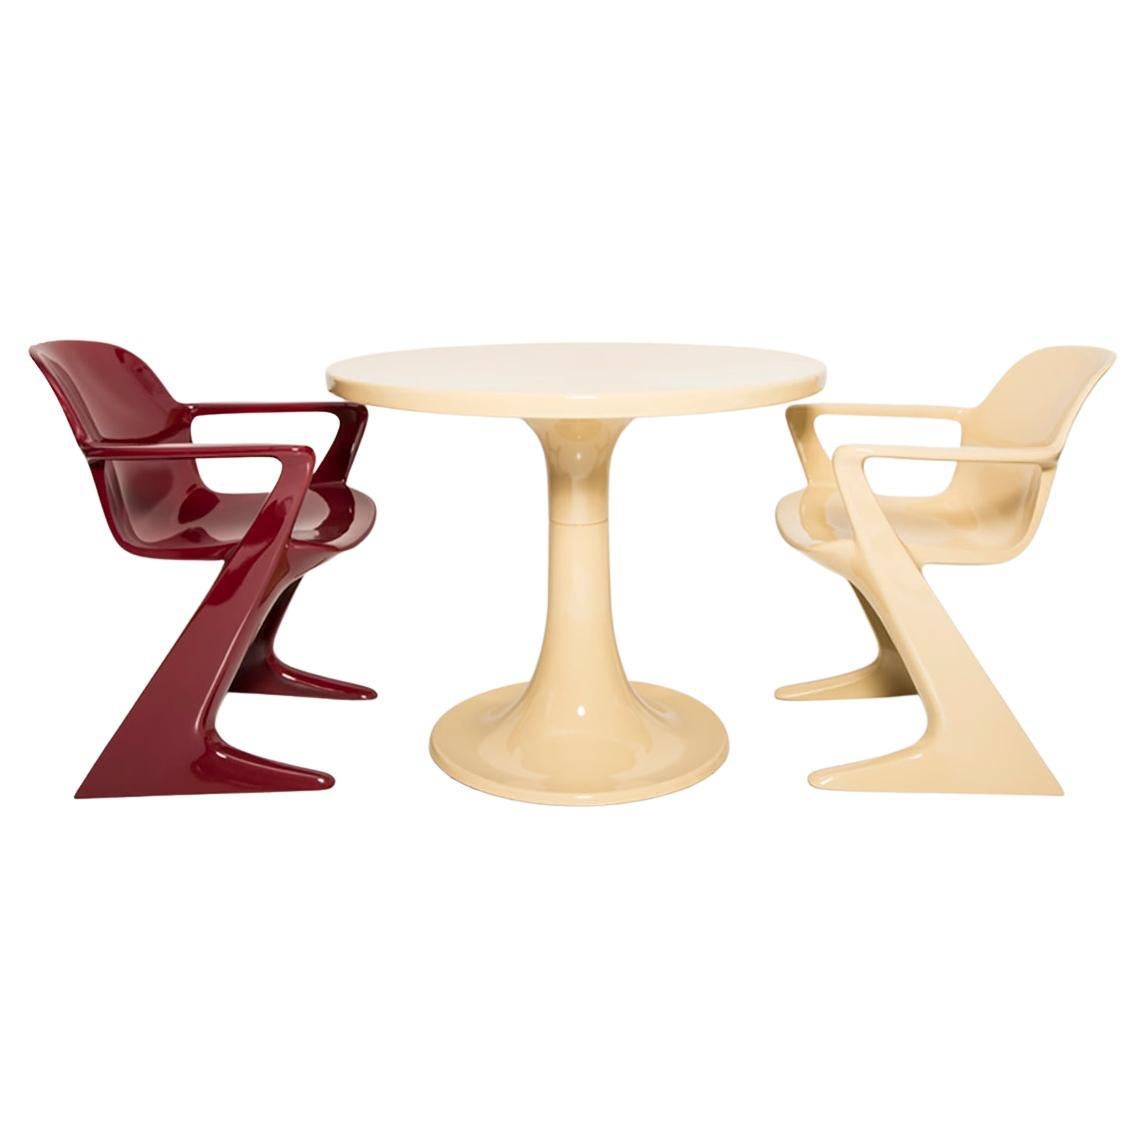 Midcentury Beige and Red Kangaroo Chairs and Table Ernst Moeckl, Germany, 1968 For Sale